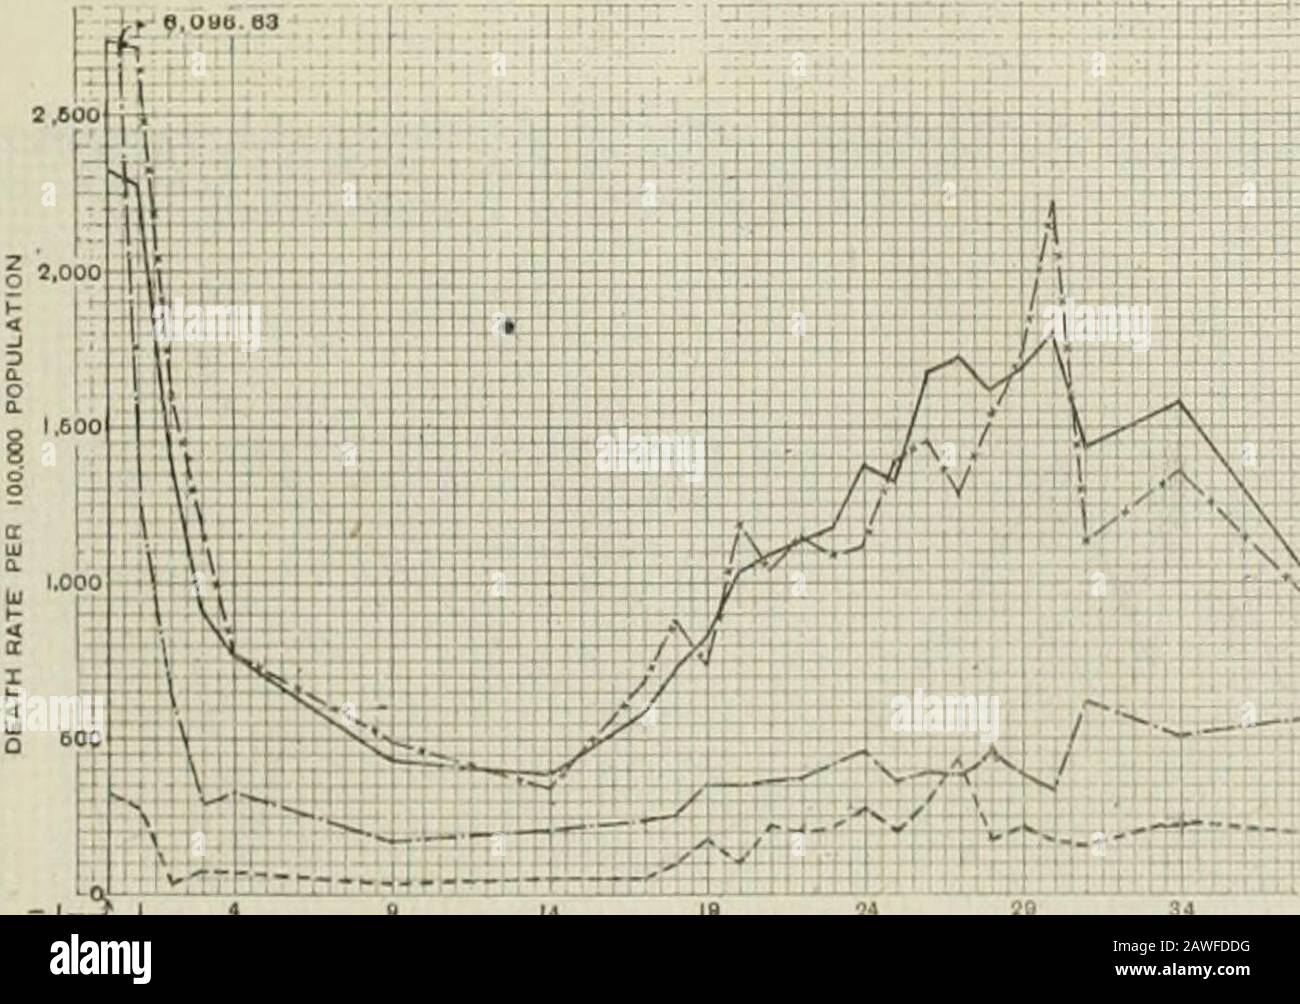 Special tables of mortality from influenza and pneumoniaIndiana, Kansas, and Philadelphia, PaSeptember 1 to December 31, 1918 . Diagram 13.—INDIANA, MALES: Annual DeathRate [Per 100,000 Estimated Population, from InfluenzaAND Pneumonia (All Forms) as Primary and Contributory Causes and from All Other Causes, for thePeriod Sept. 1 to Dec. 31, 1918. INoTE —Irimary based on 1910 is a line of rough rates drawn as a check of the accuracy of the line of primary rates based upon estimated populations. These rough rates were found by the method described on pages 9 and 10 of the text.). ^apa^PPH^ ^mm Stock Photo